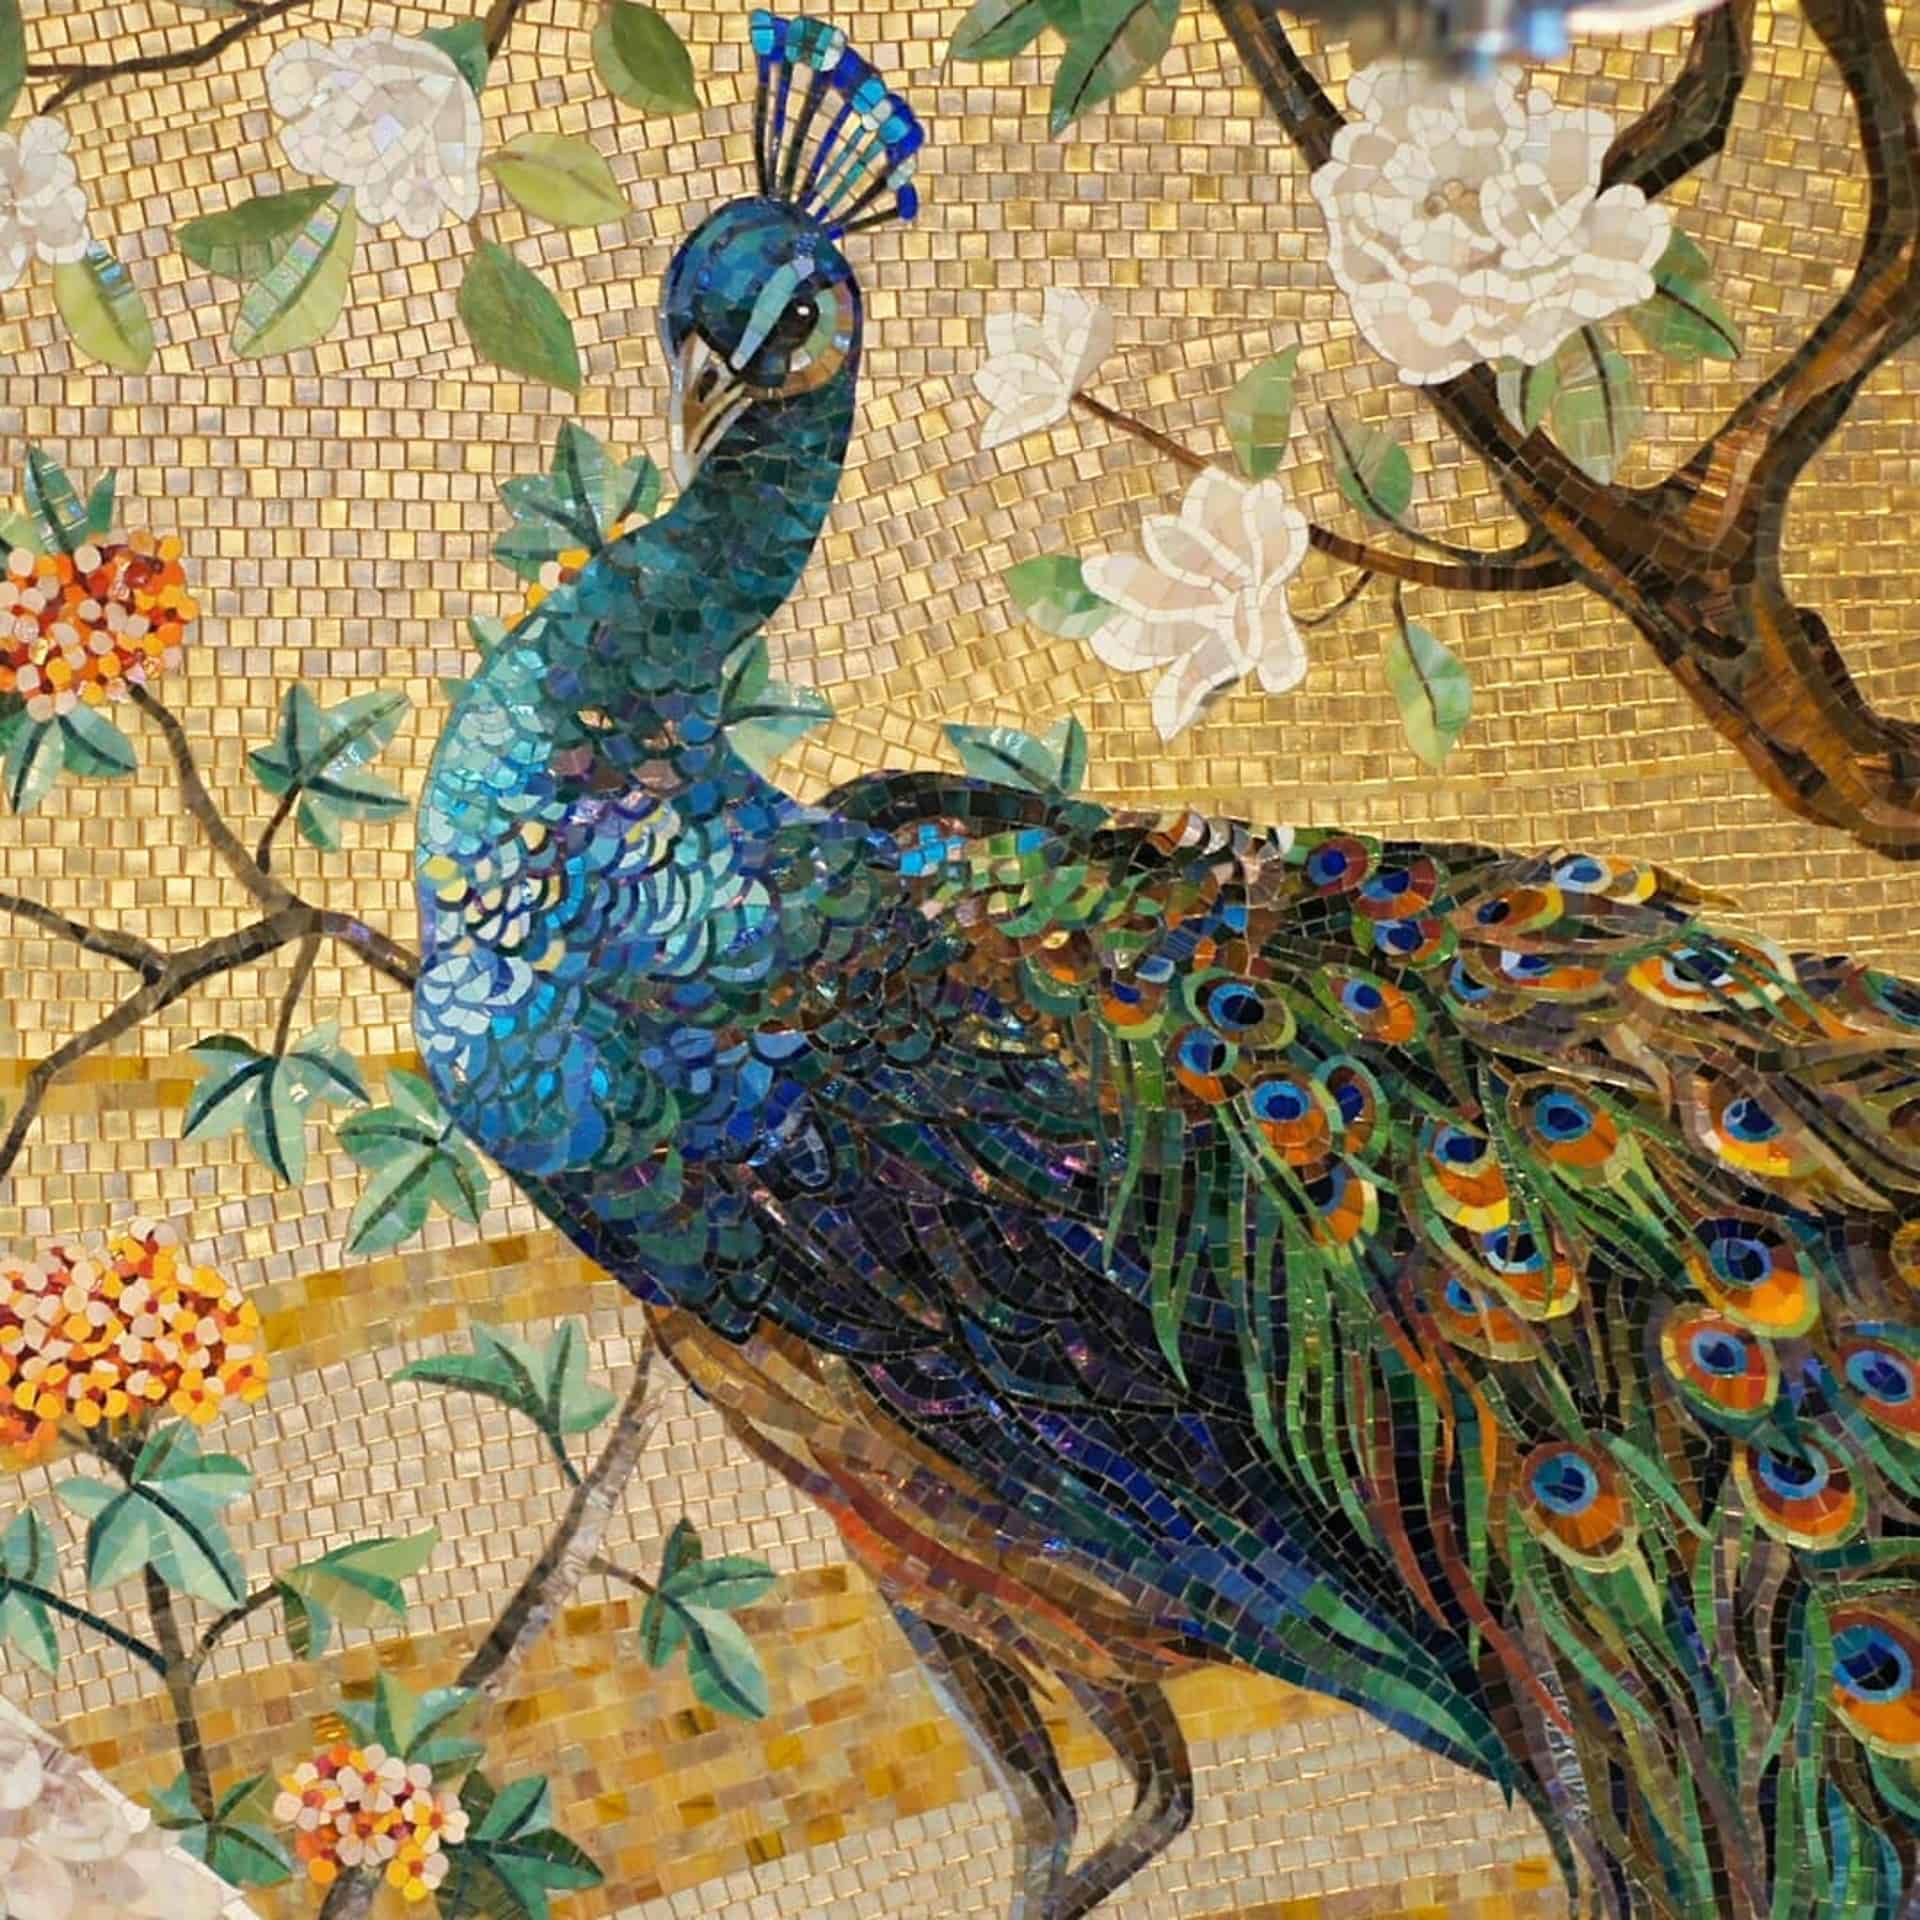 Mosaic art of a colorful peacock with its vibrant feathers displayed, surrounded by intricate designs of flowers and leaves.